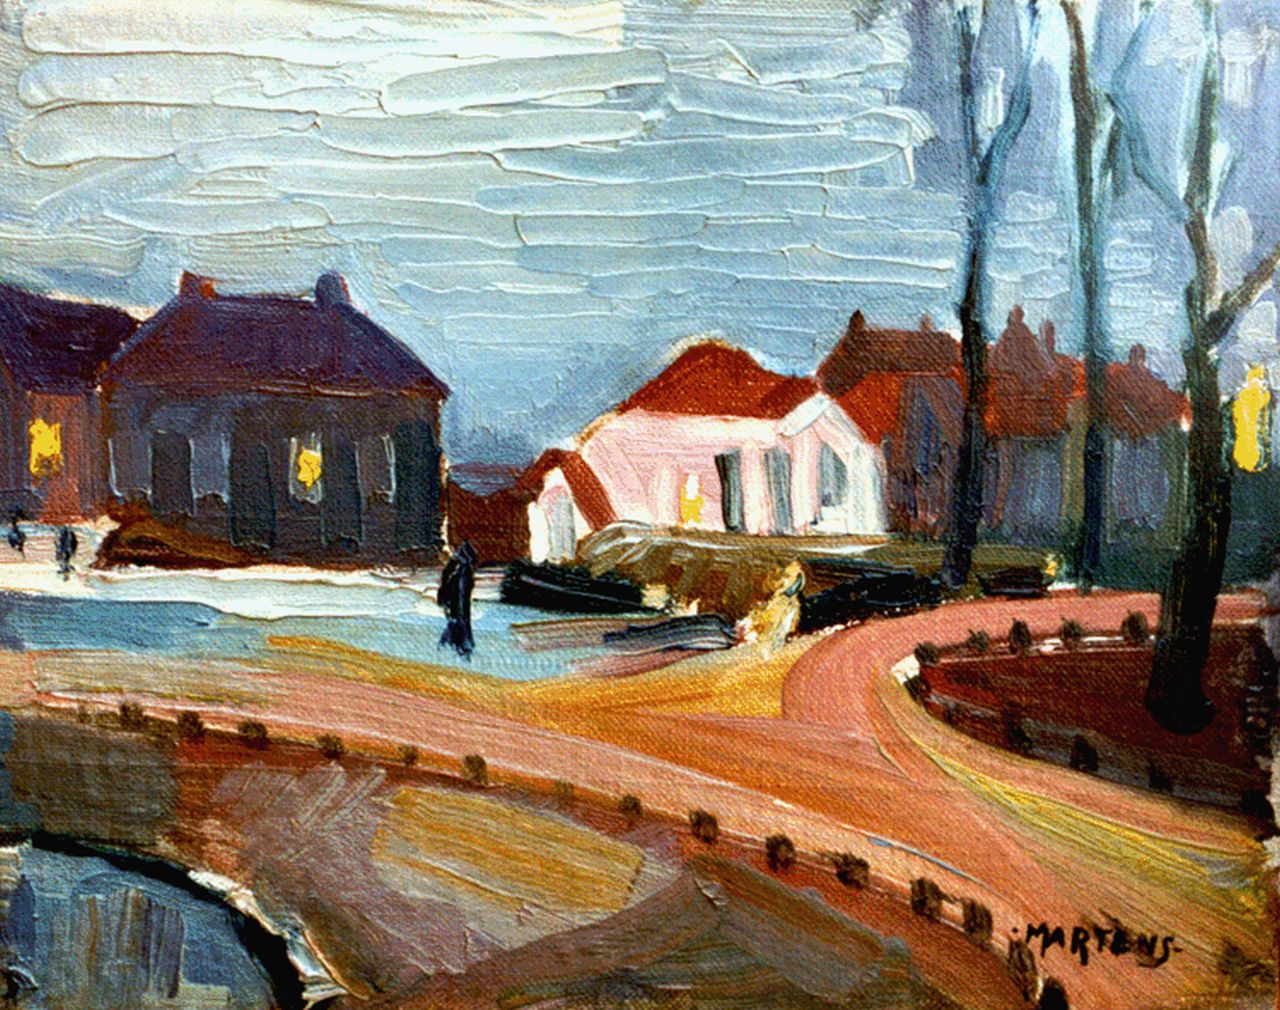 Martens G.G.  | Gijsbert 'George' Martens, Noorderplantsoen, Groningen, oil on canvas laid down on painter's board 18.3 x 23.3 cm, signed l.r. and painted between 1920-1922